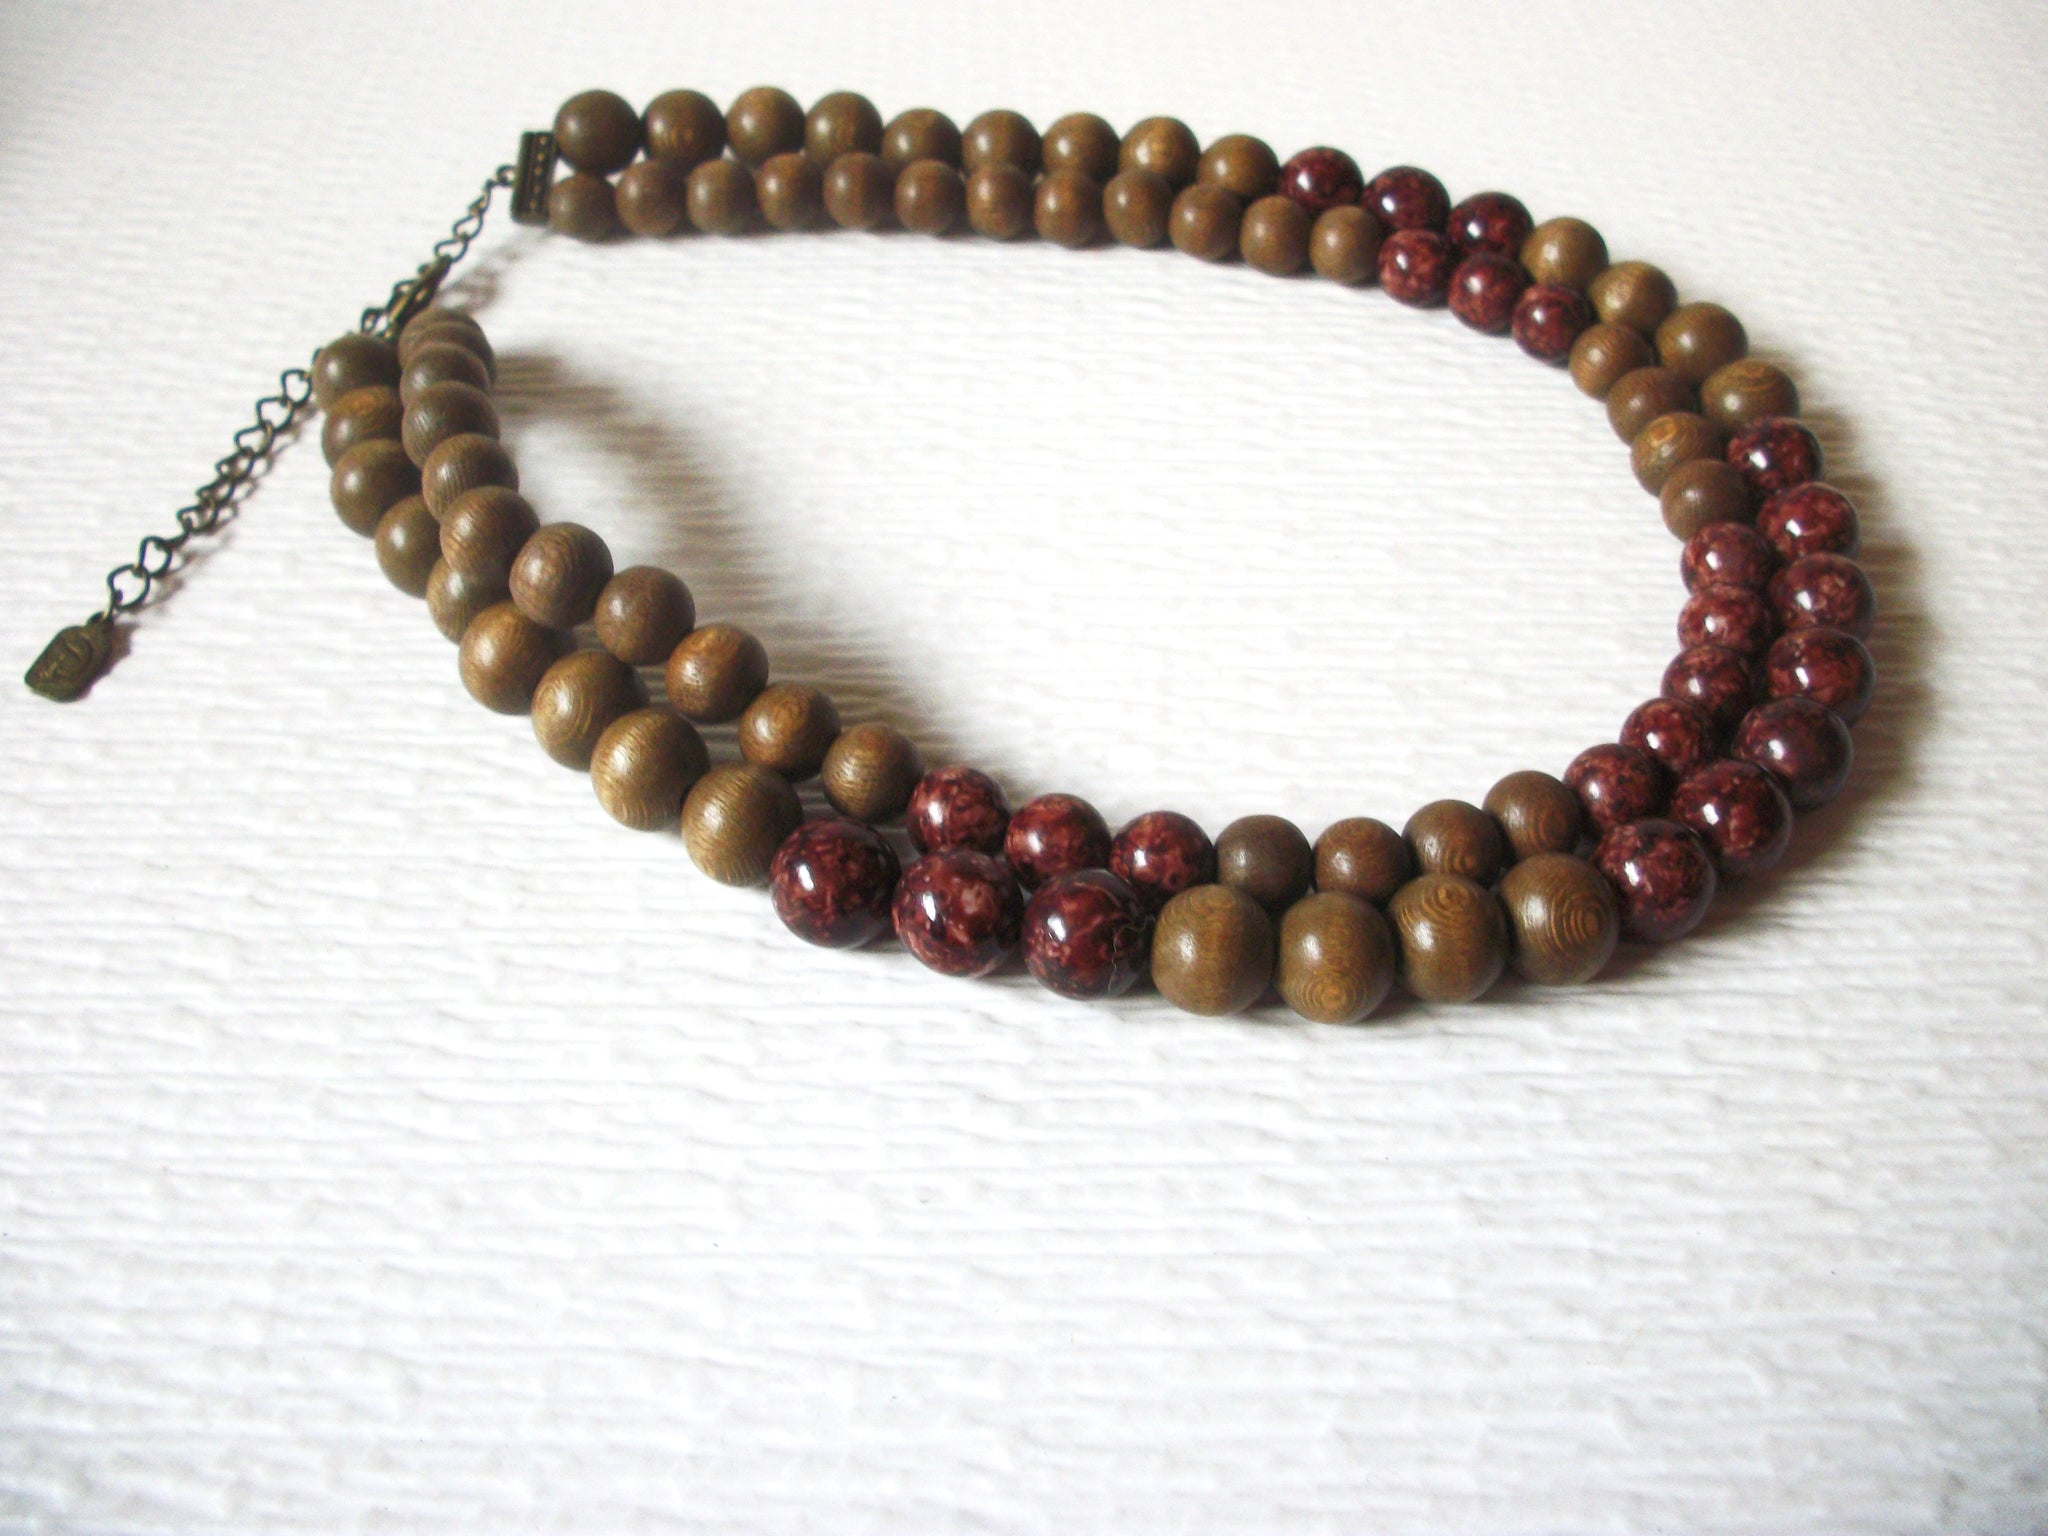 Vintage Wood Beads 18" Necklace 122916